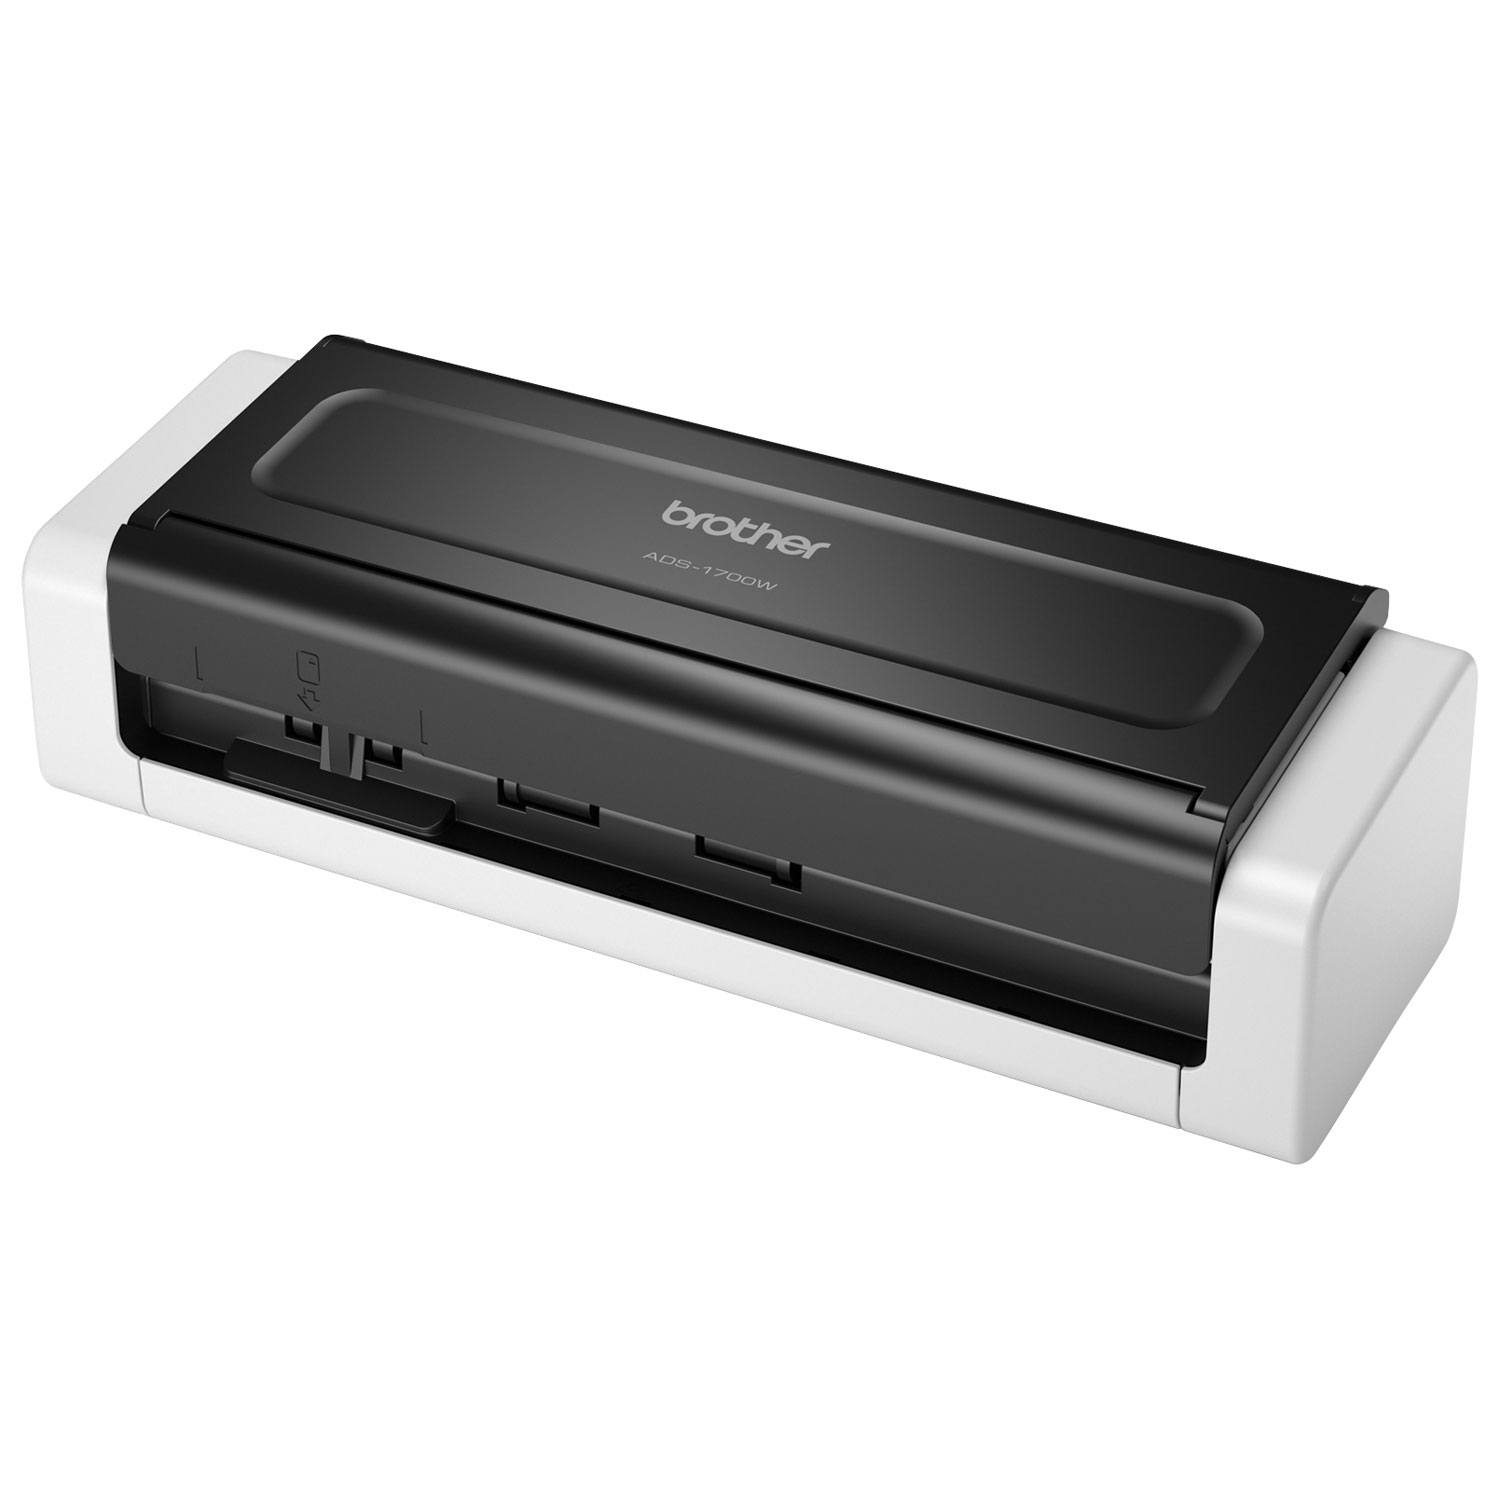 Brother ADS-1700W Wireless Desktop Document Scanner with Touchscreen LCD  White ADS-1700W - Best Buy